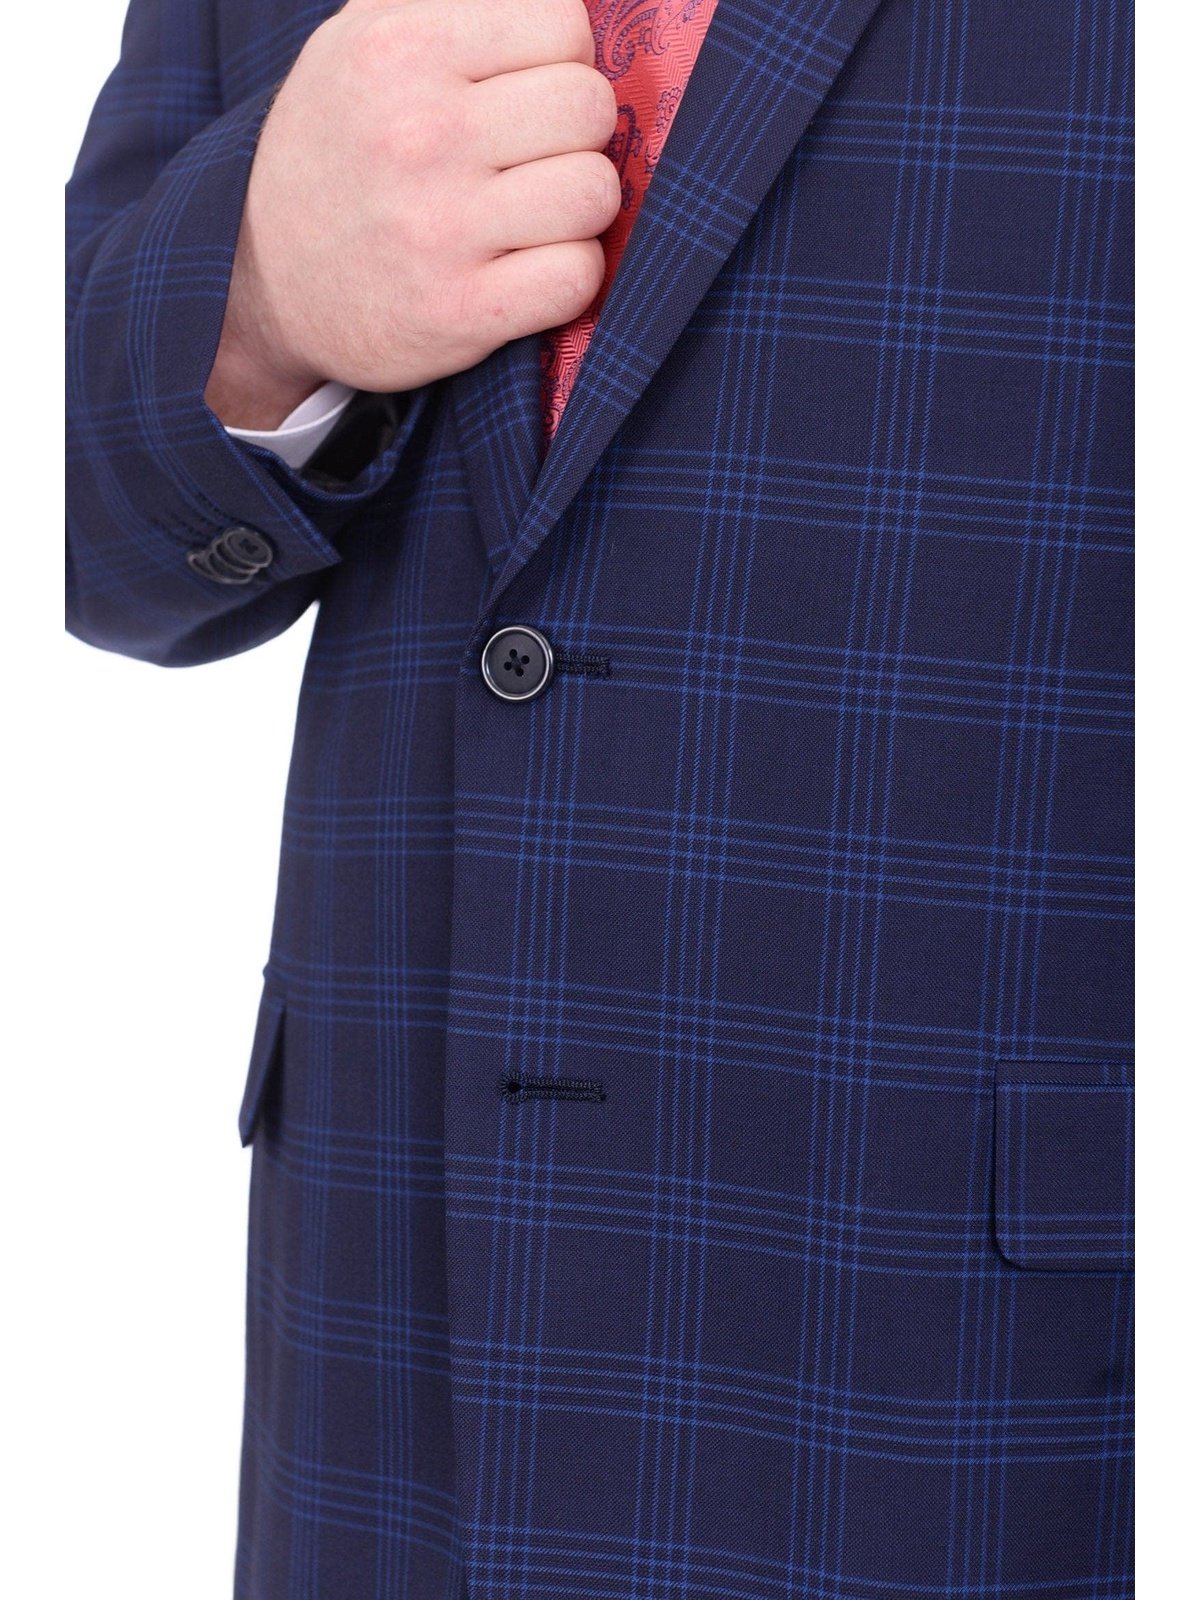 Lazetti Couture Sale Suits Lazetti Couture Portly Fit Blue Plaid Two Button Wool Suit